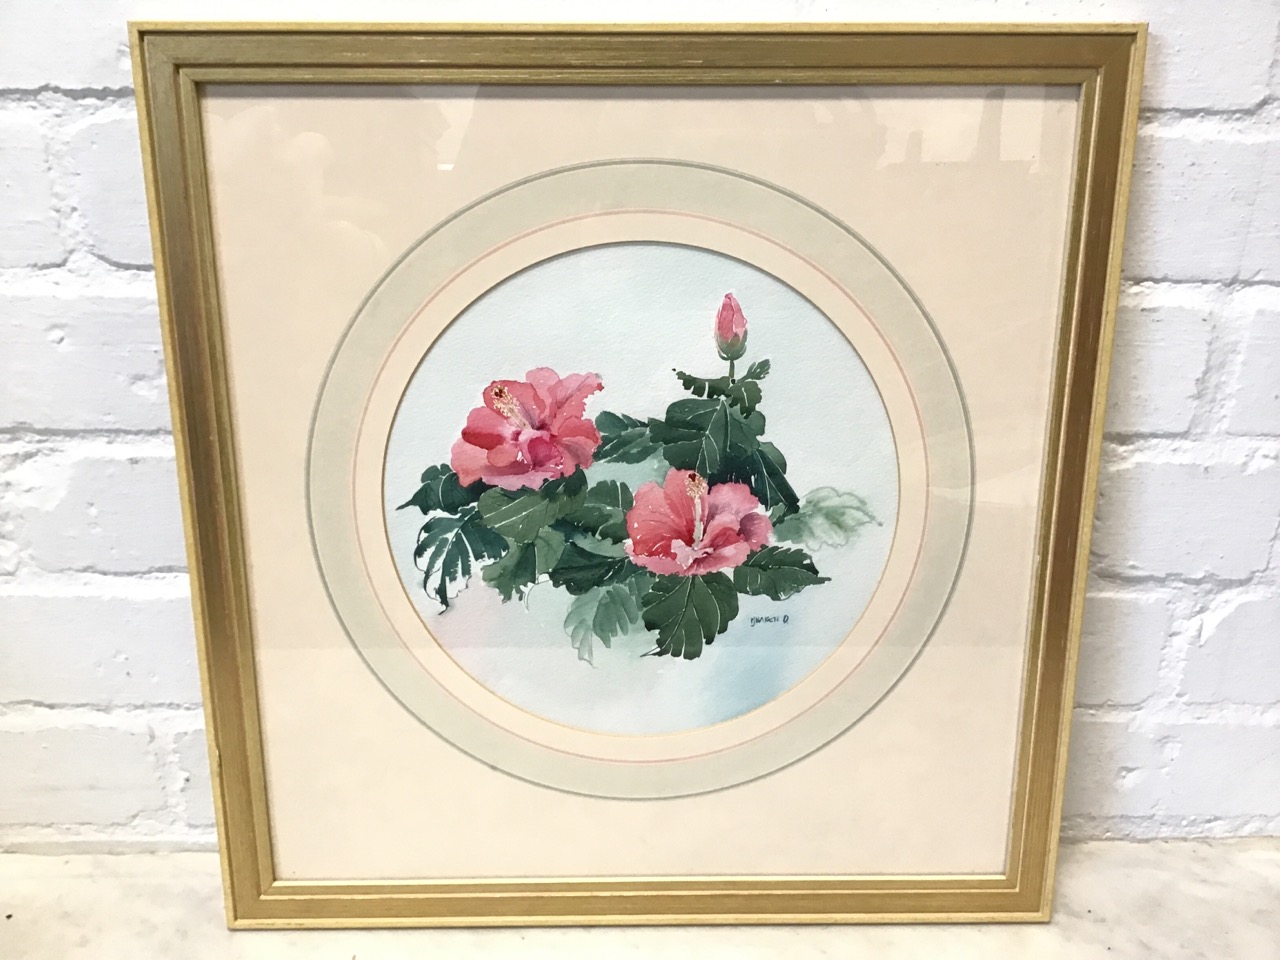 J Baker, watercolour, circular study of flowers, signed, mounted and gilt framed. (10.5in dia)